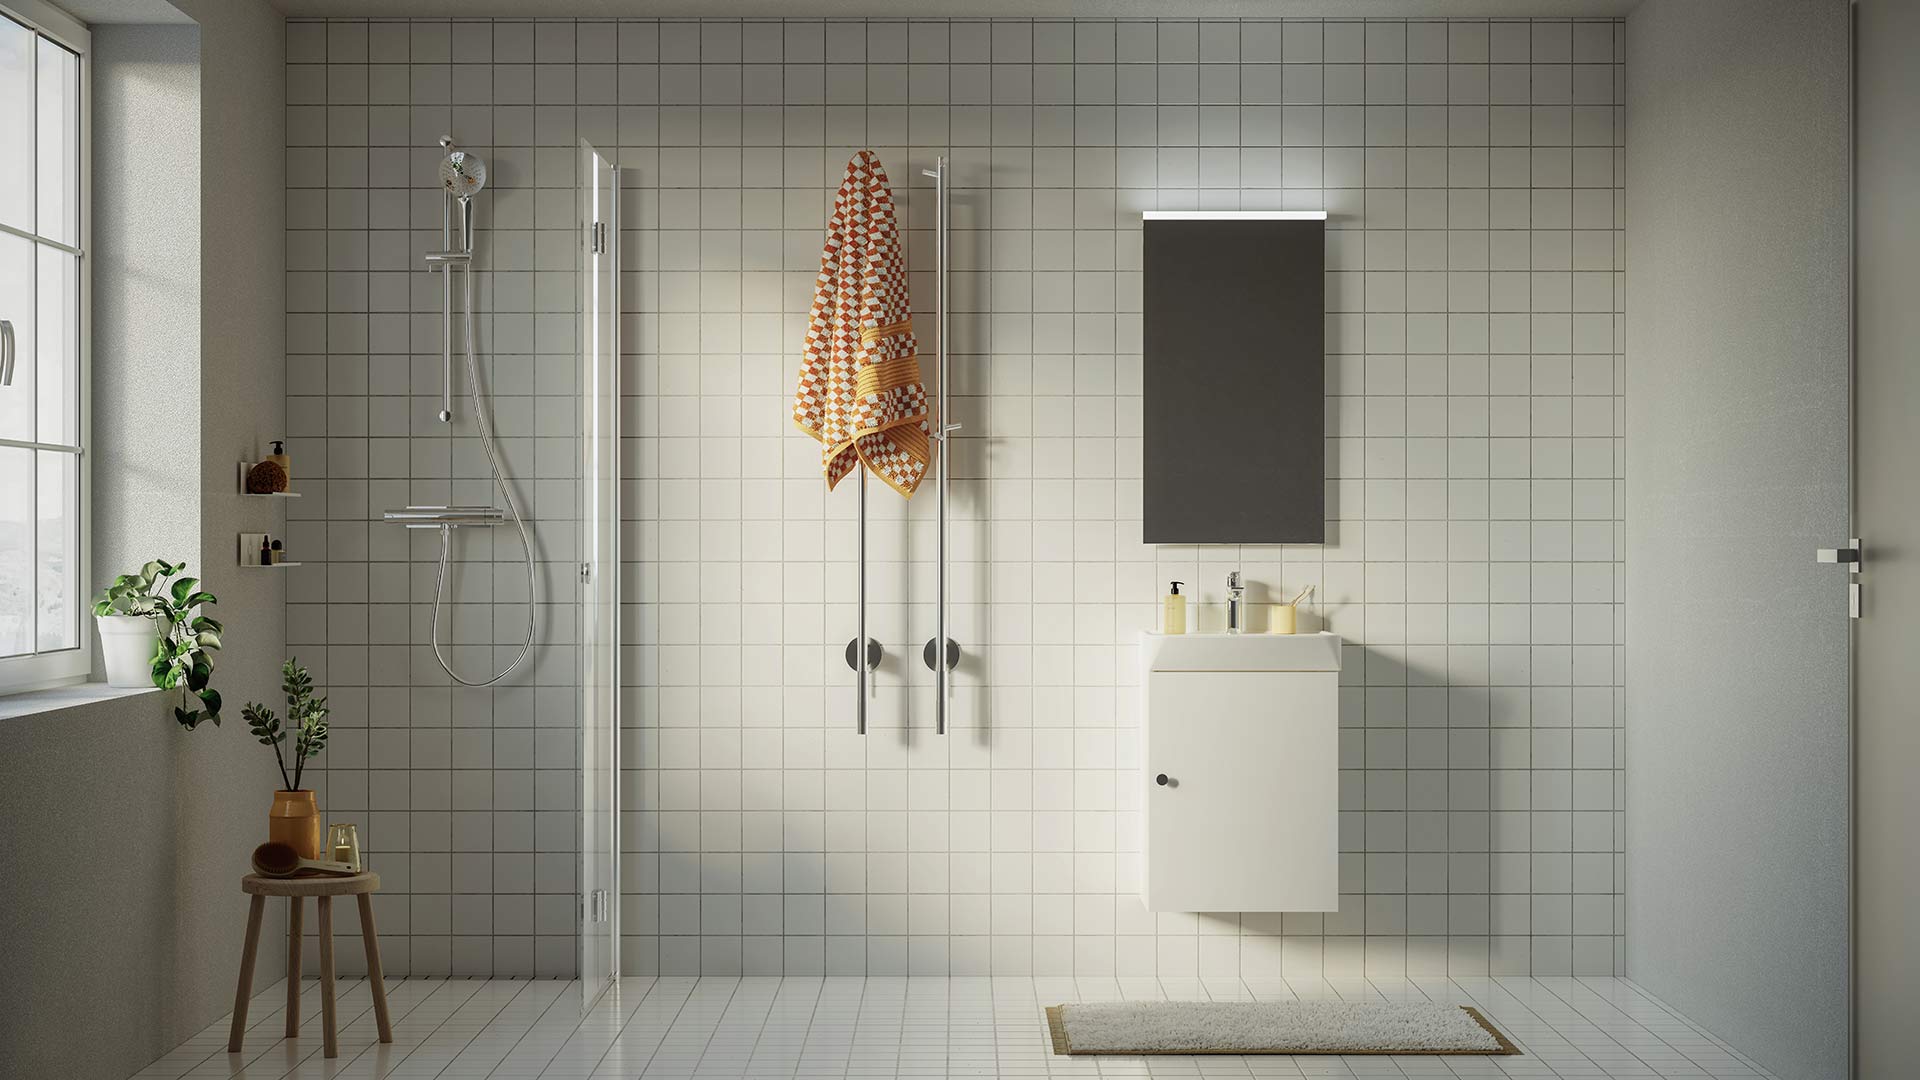 Design with sustainability in mind with bathrooms made in Sweden from durable materials